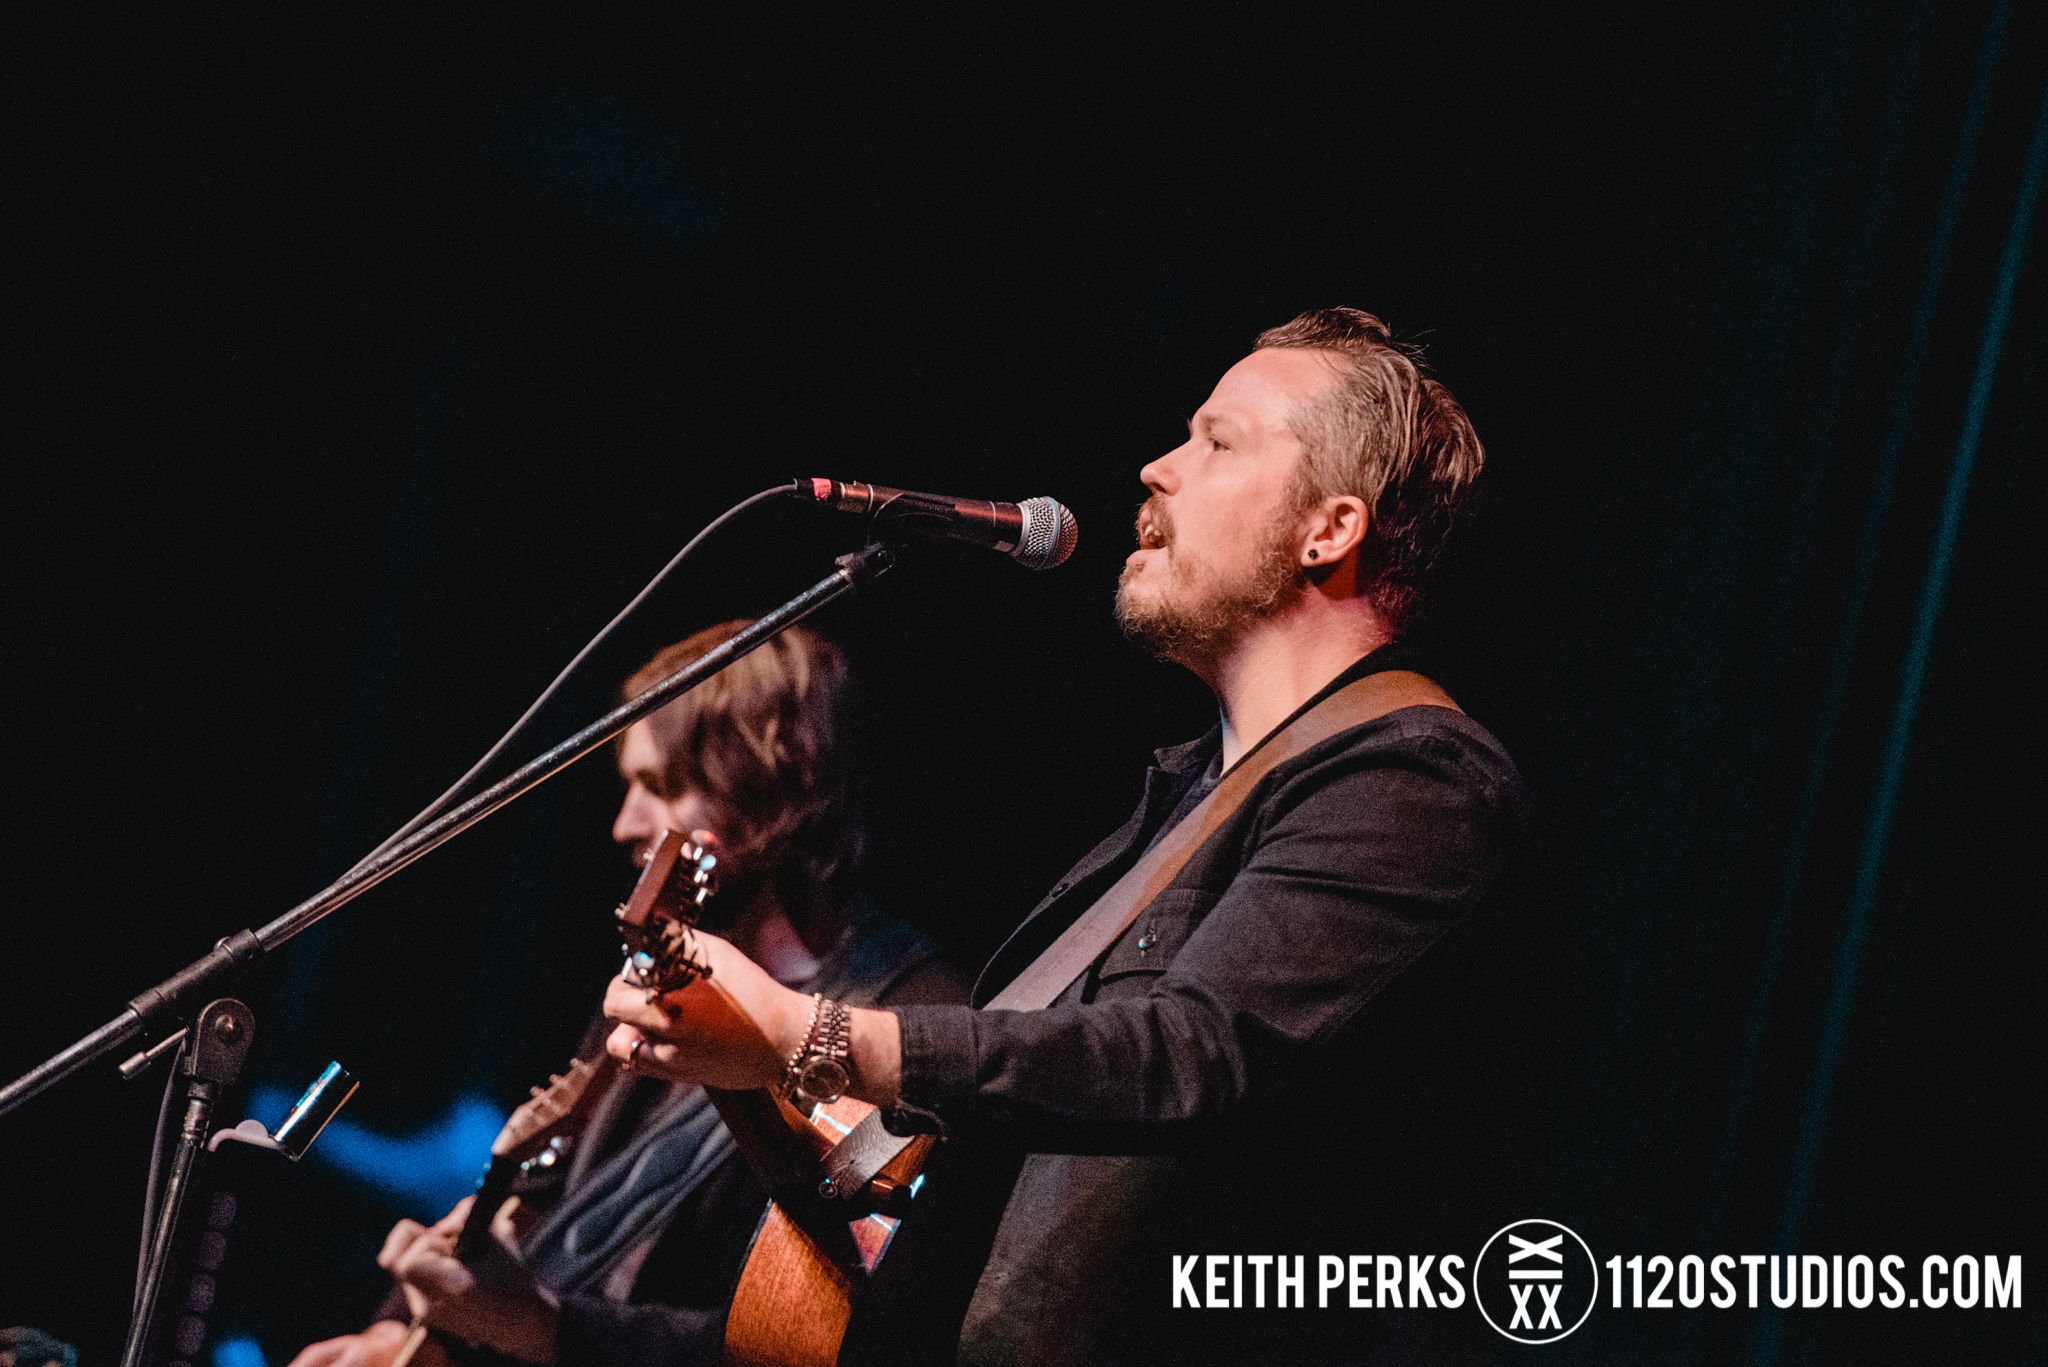 JASON ISBELL AT KIRBY CENTER WITH KEVIN MORBY